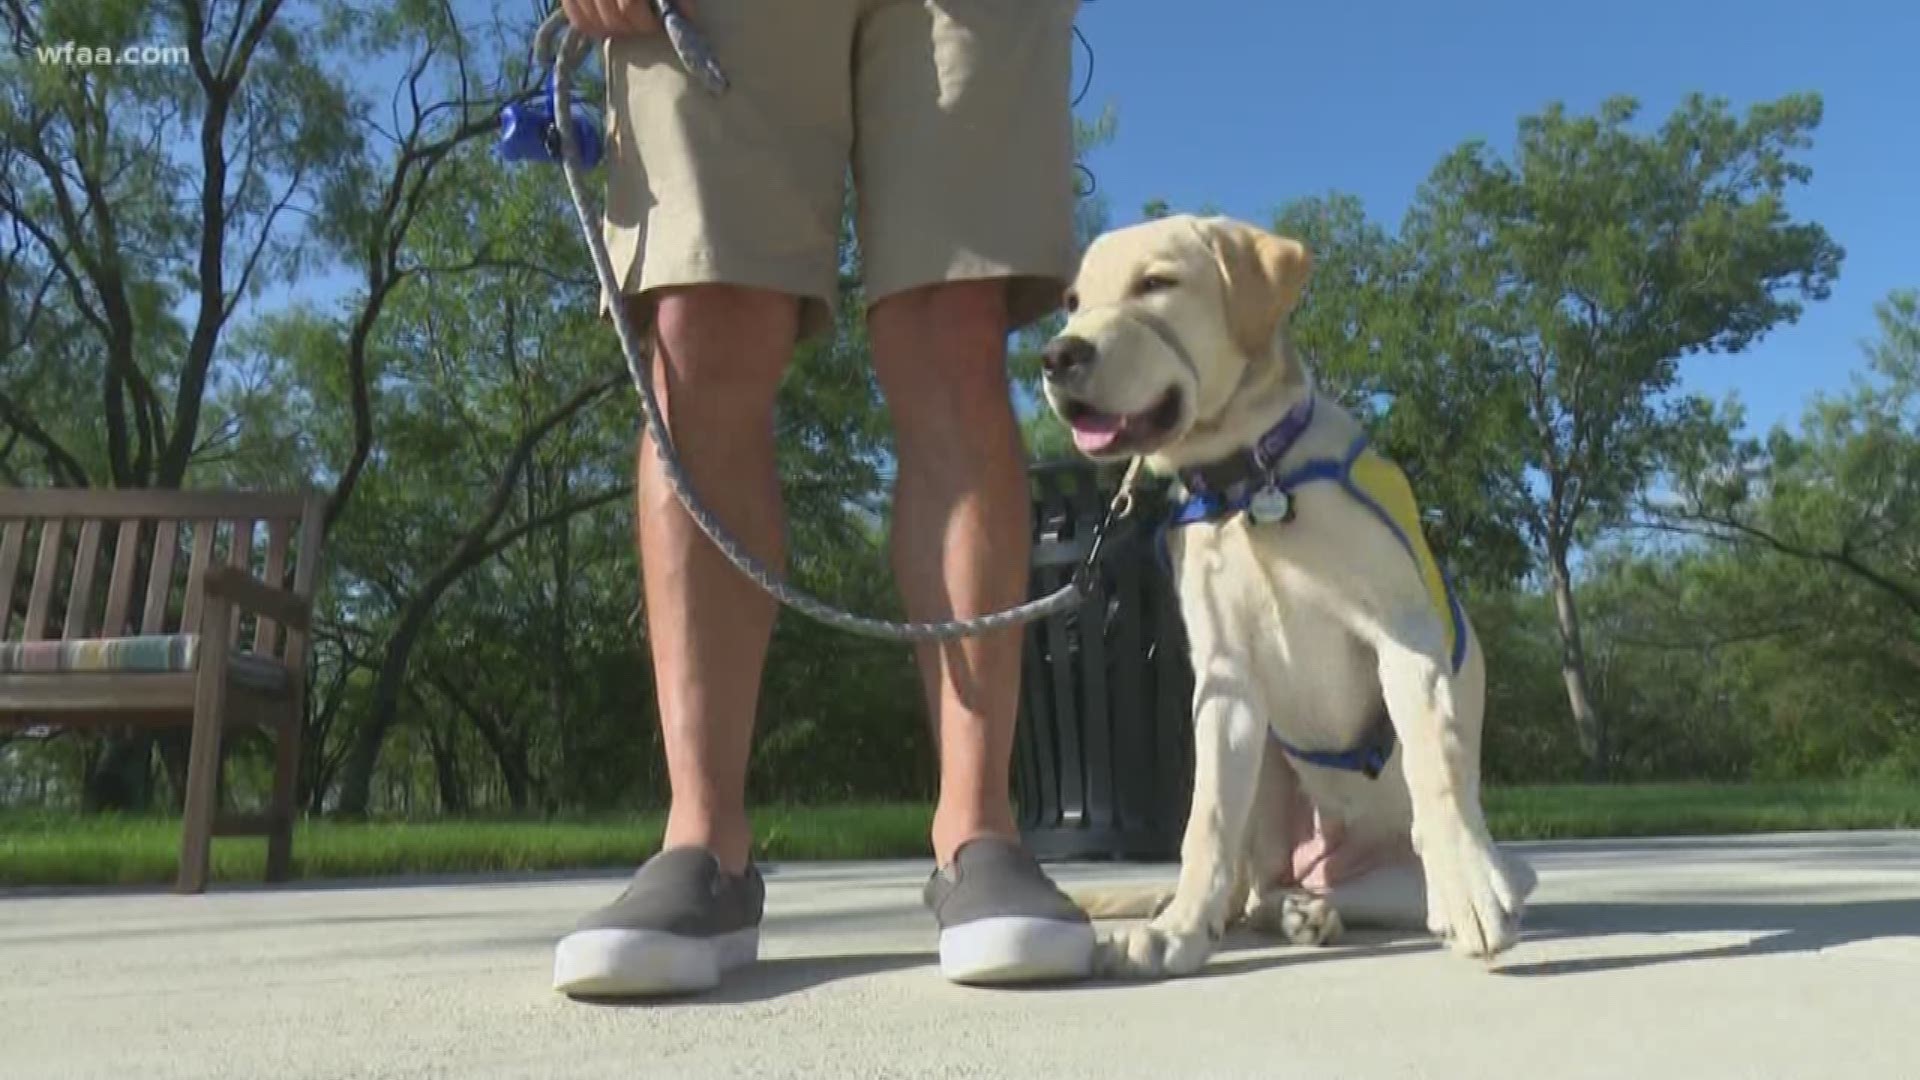 Canine companions for Independence helps provide assistance dogs to people in North Texas living with disabilities. 